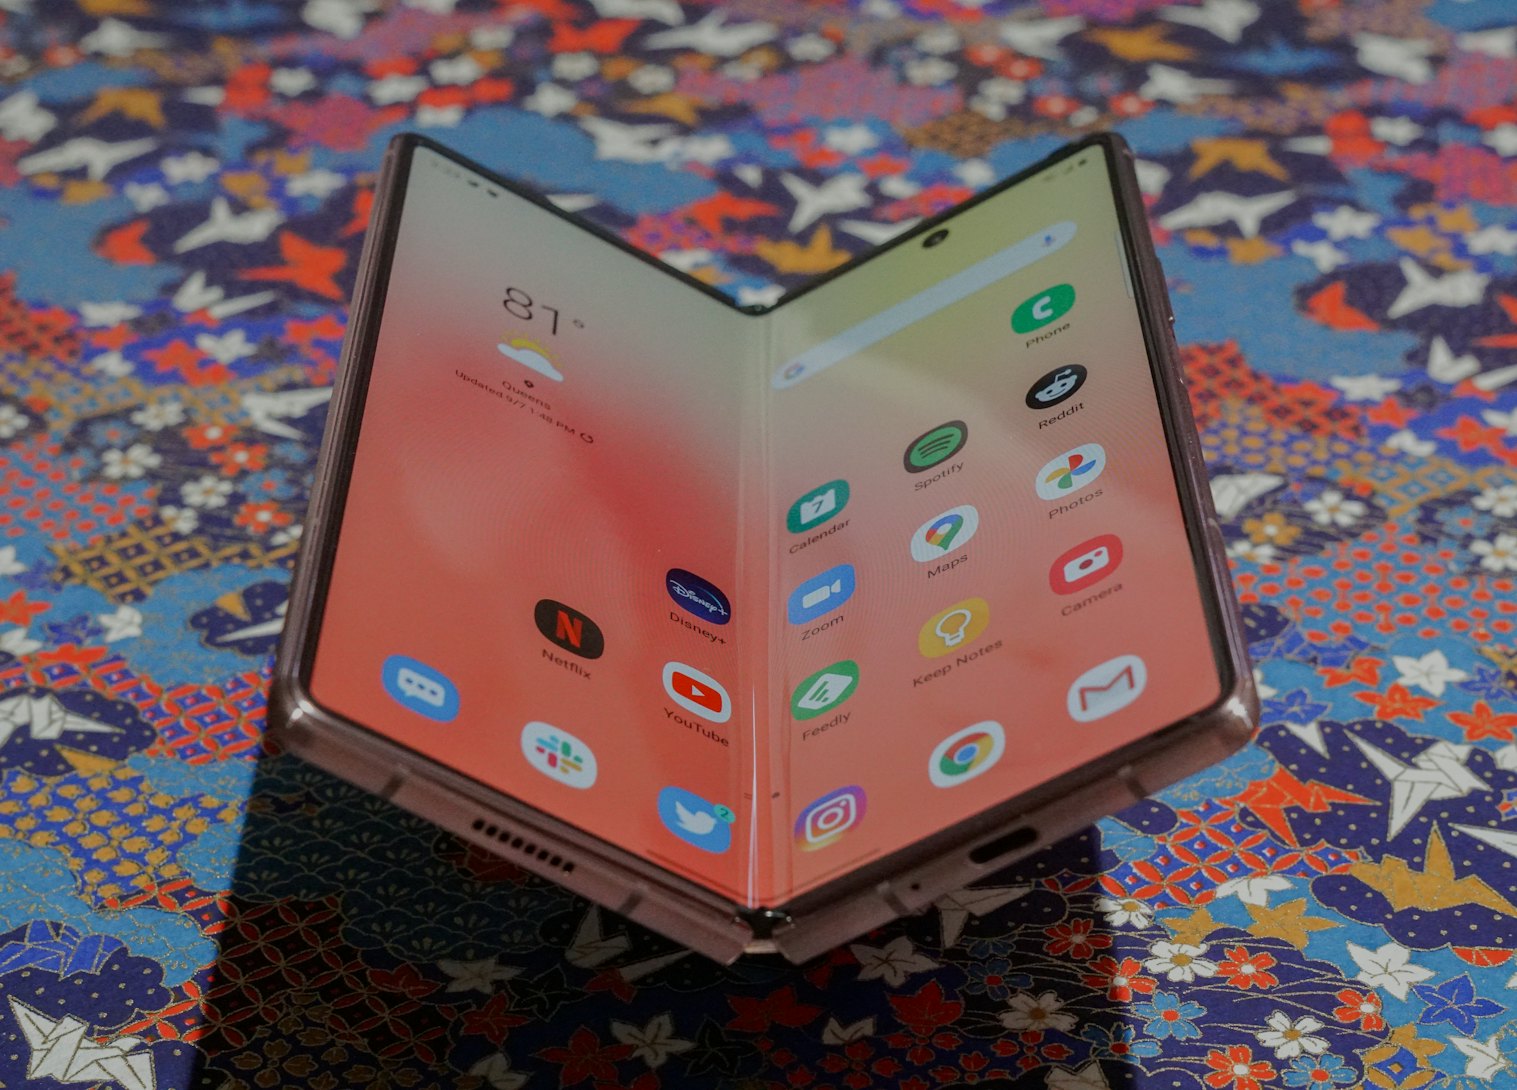 Samsung Galaxy Z Fold2 is official with bigger screens, new